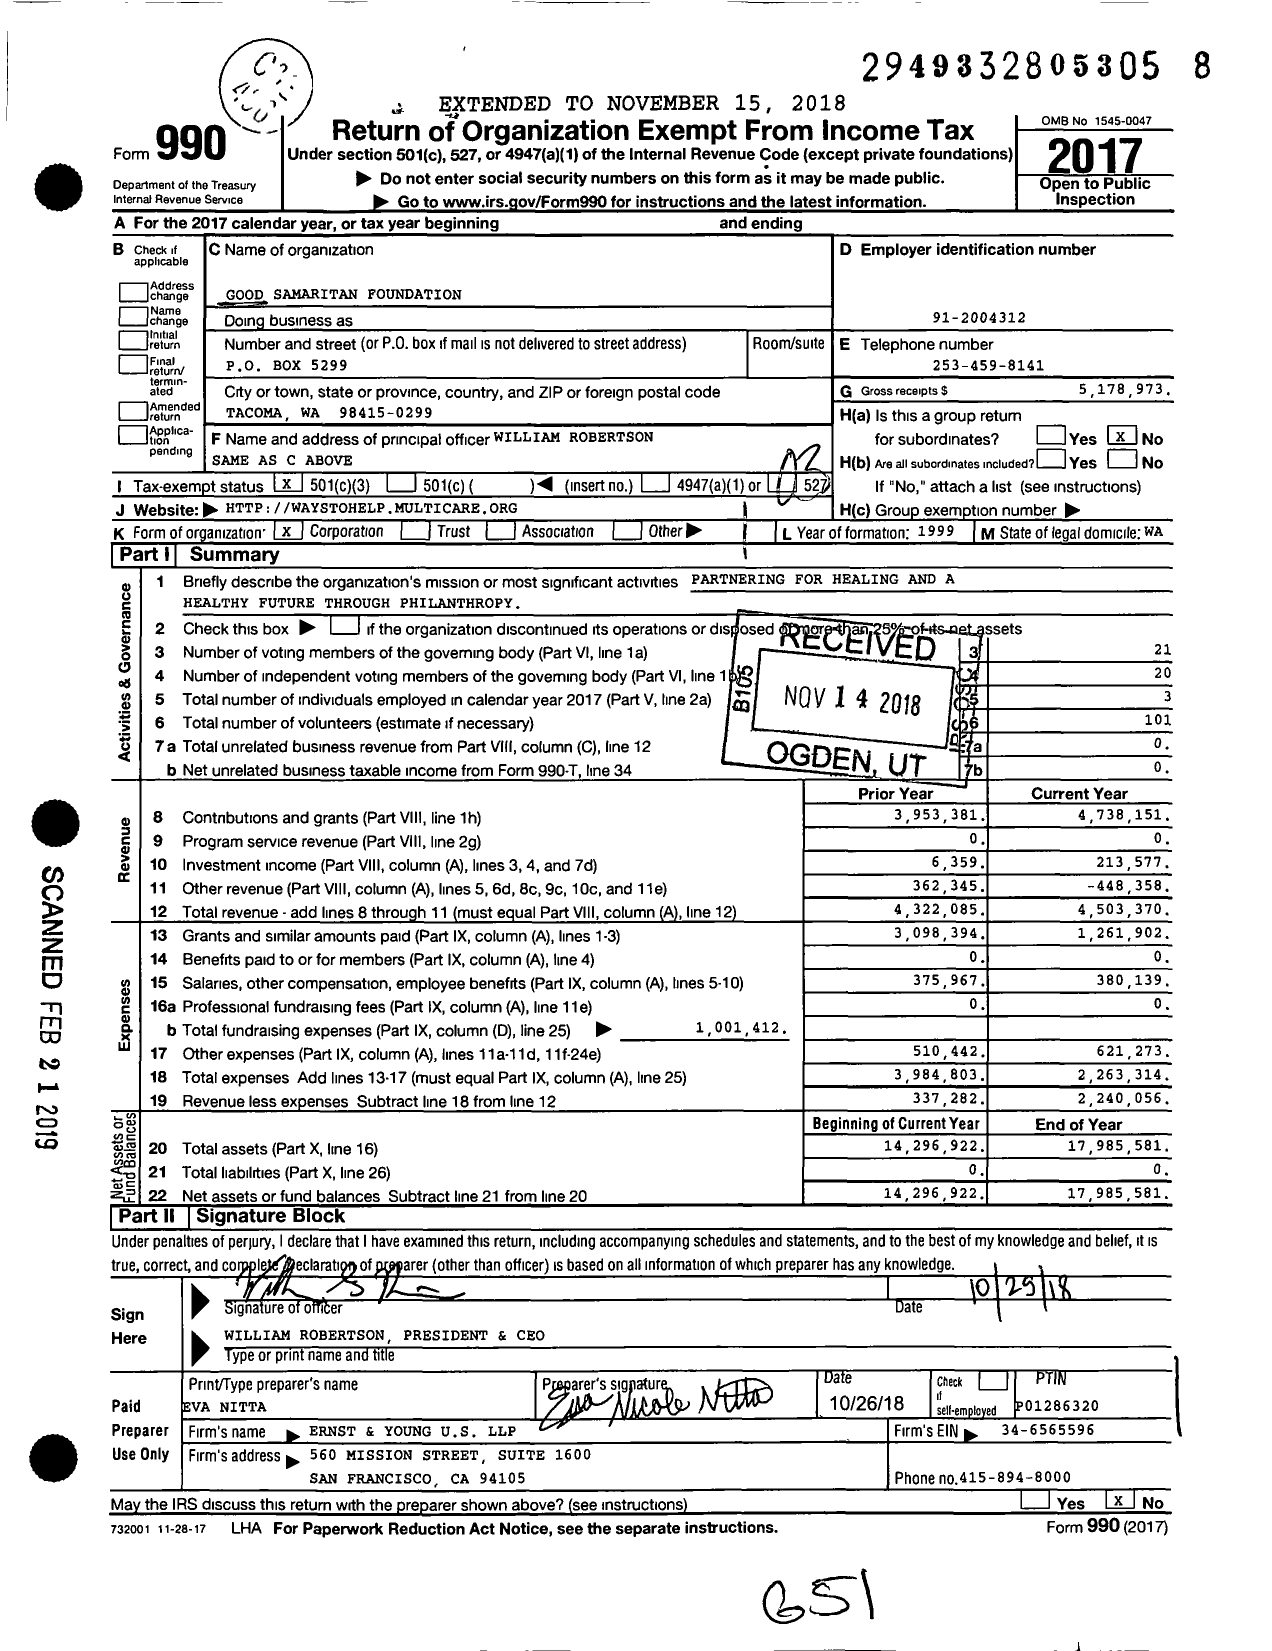 Image of first page of 2017 Form 990 for Good Samaritan Foundation